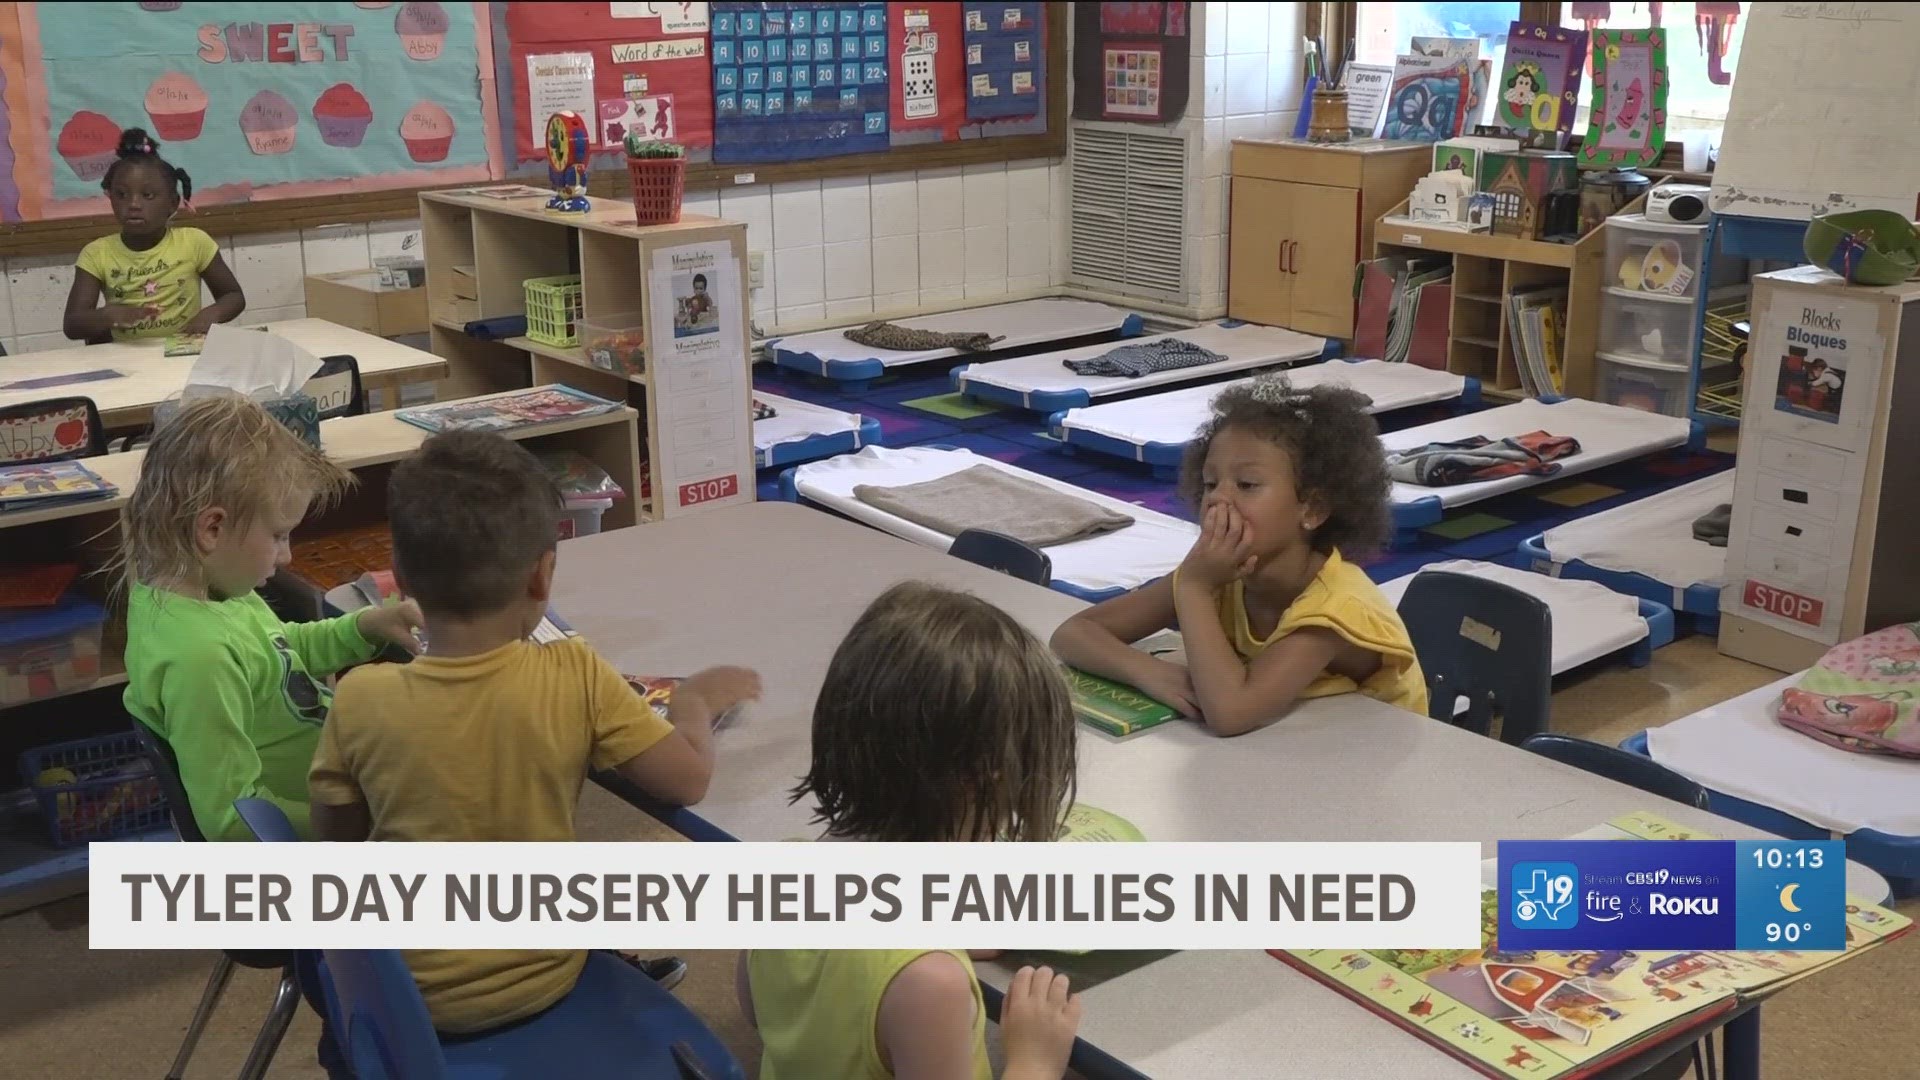 Tyler Day Nursery offers child-care and preschool education at an affortable price for low-income families.